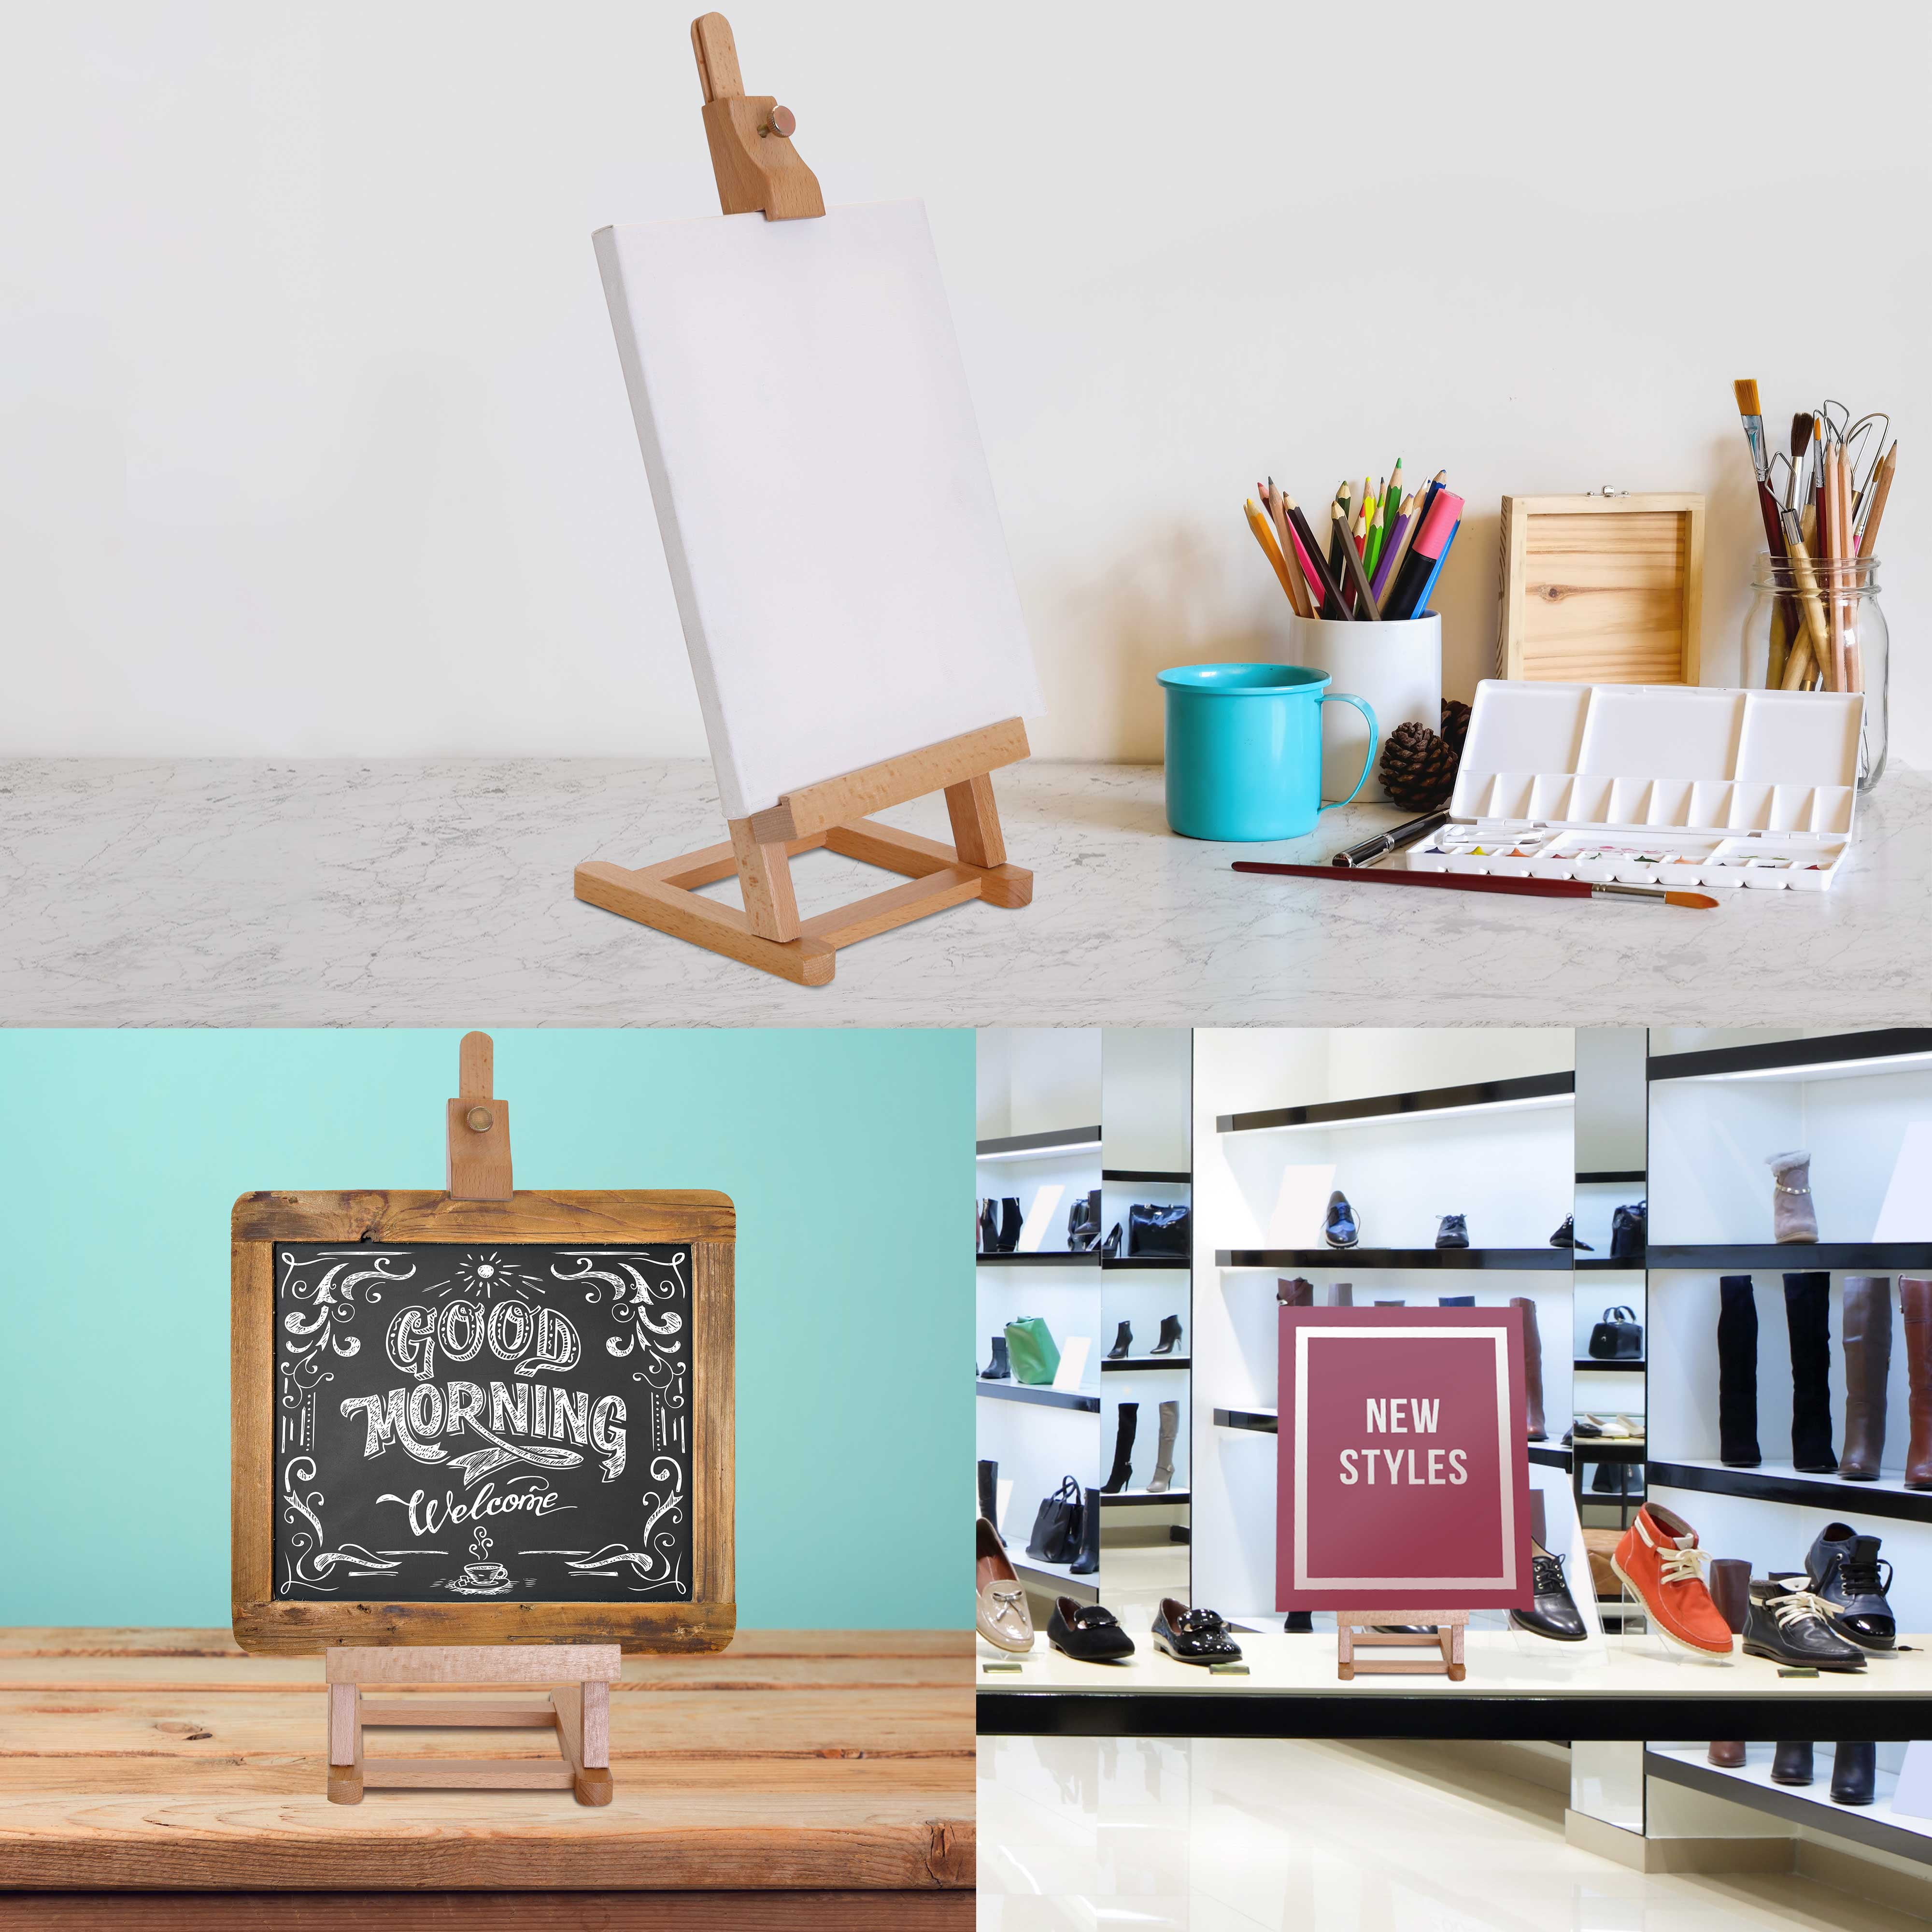 Tabletop Easel with Canvas Set, 7 Pack 16 x 9 Inches Wooden Easels and 12 x  9.5 Inches Canvases